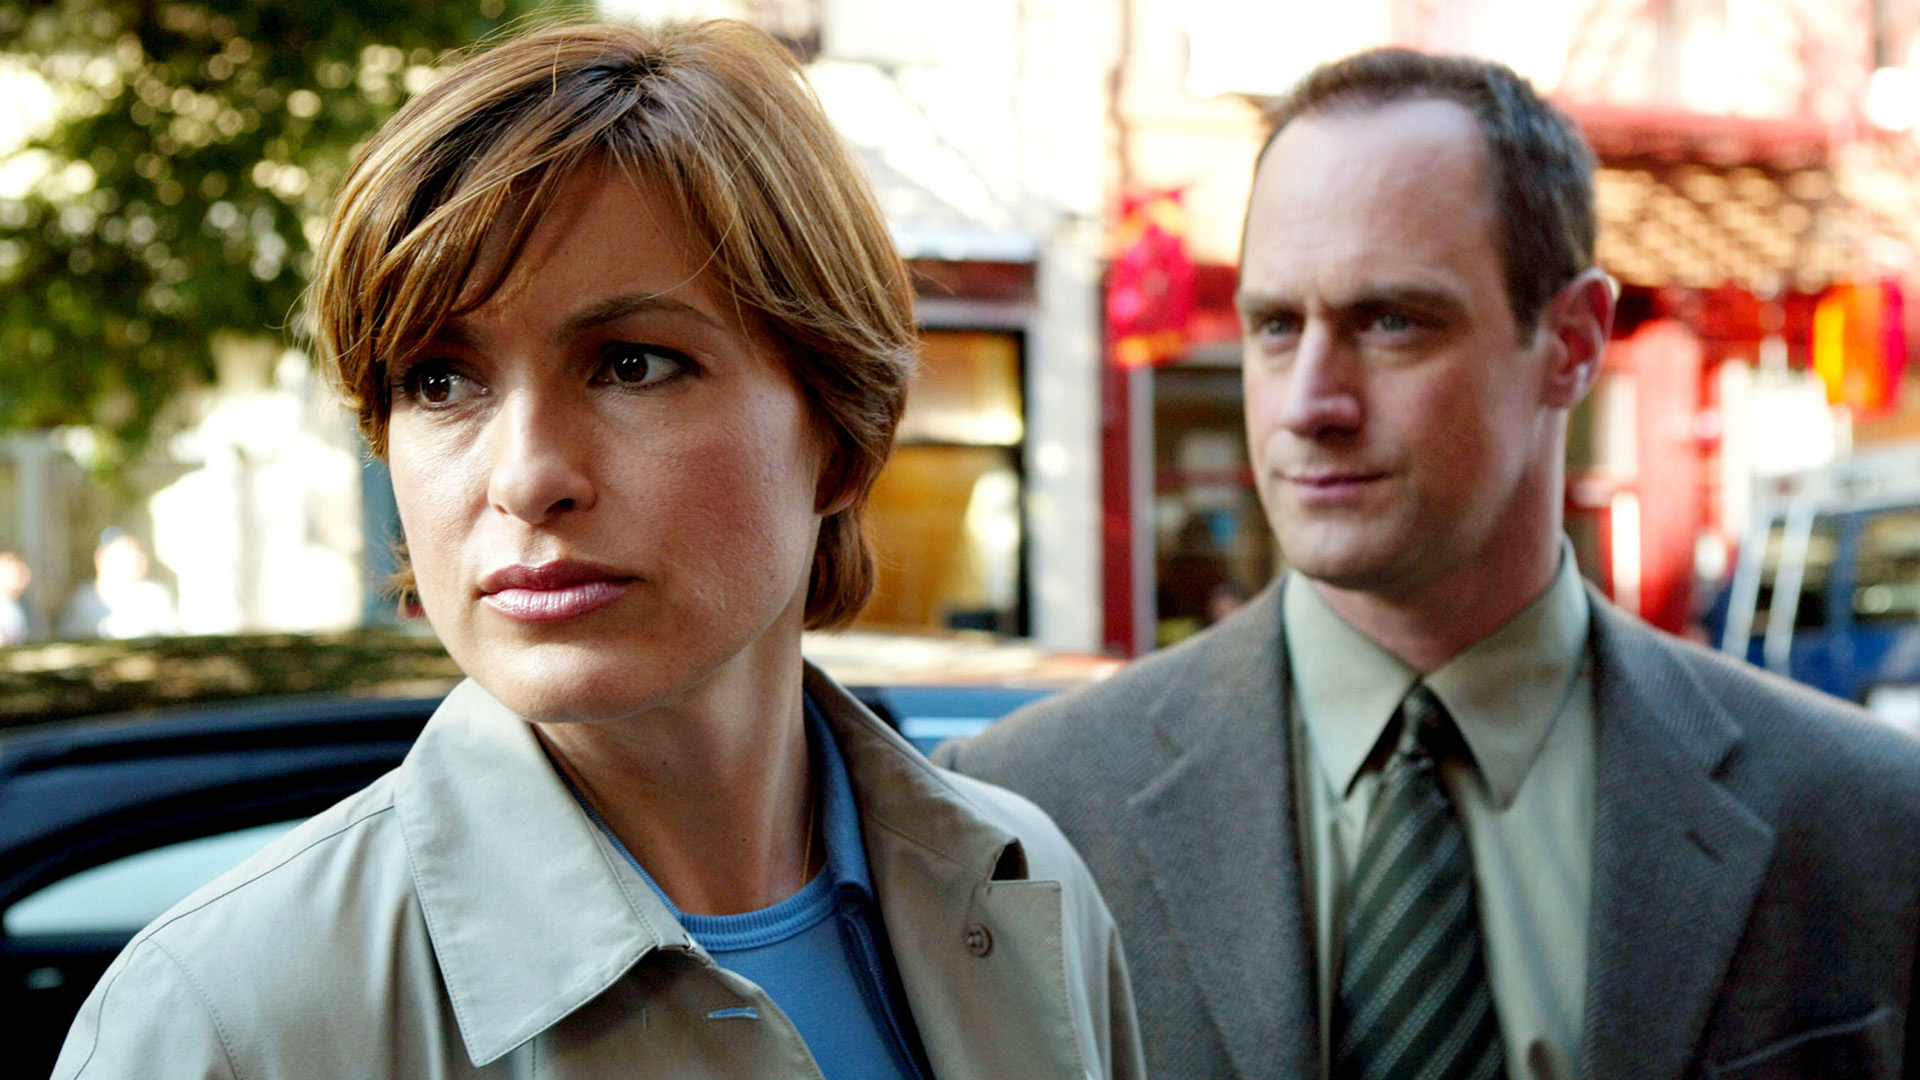 The Worst Parents on Law & Order: SVU, According to Reddit